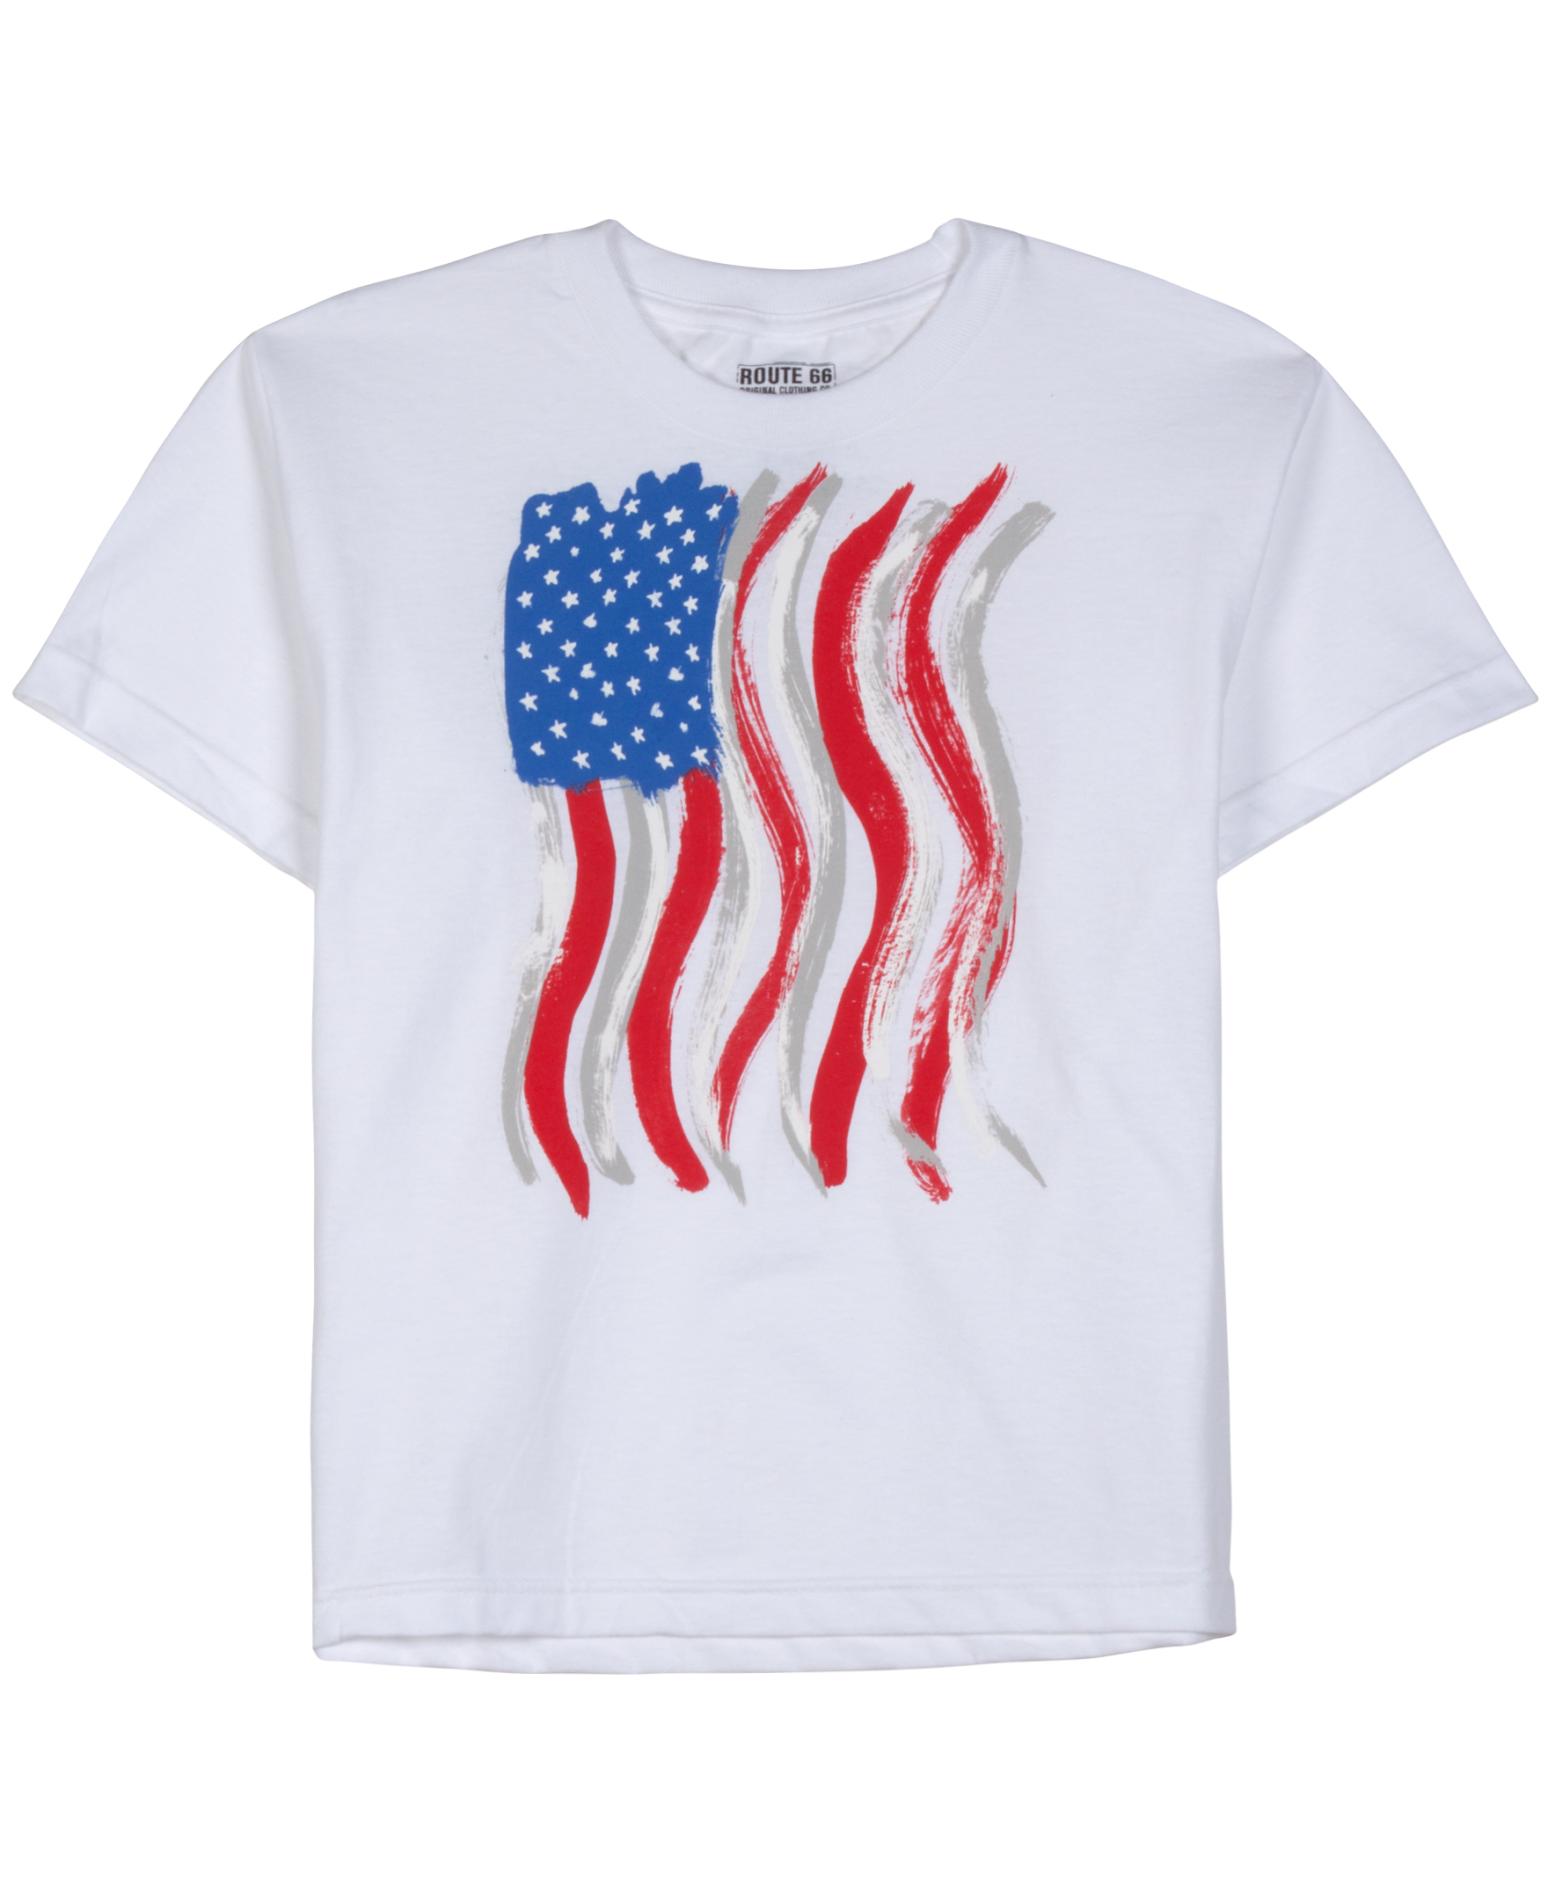 Route 66 Boy's Graphic T-Shirt - American Flag